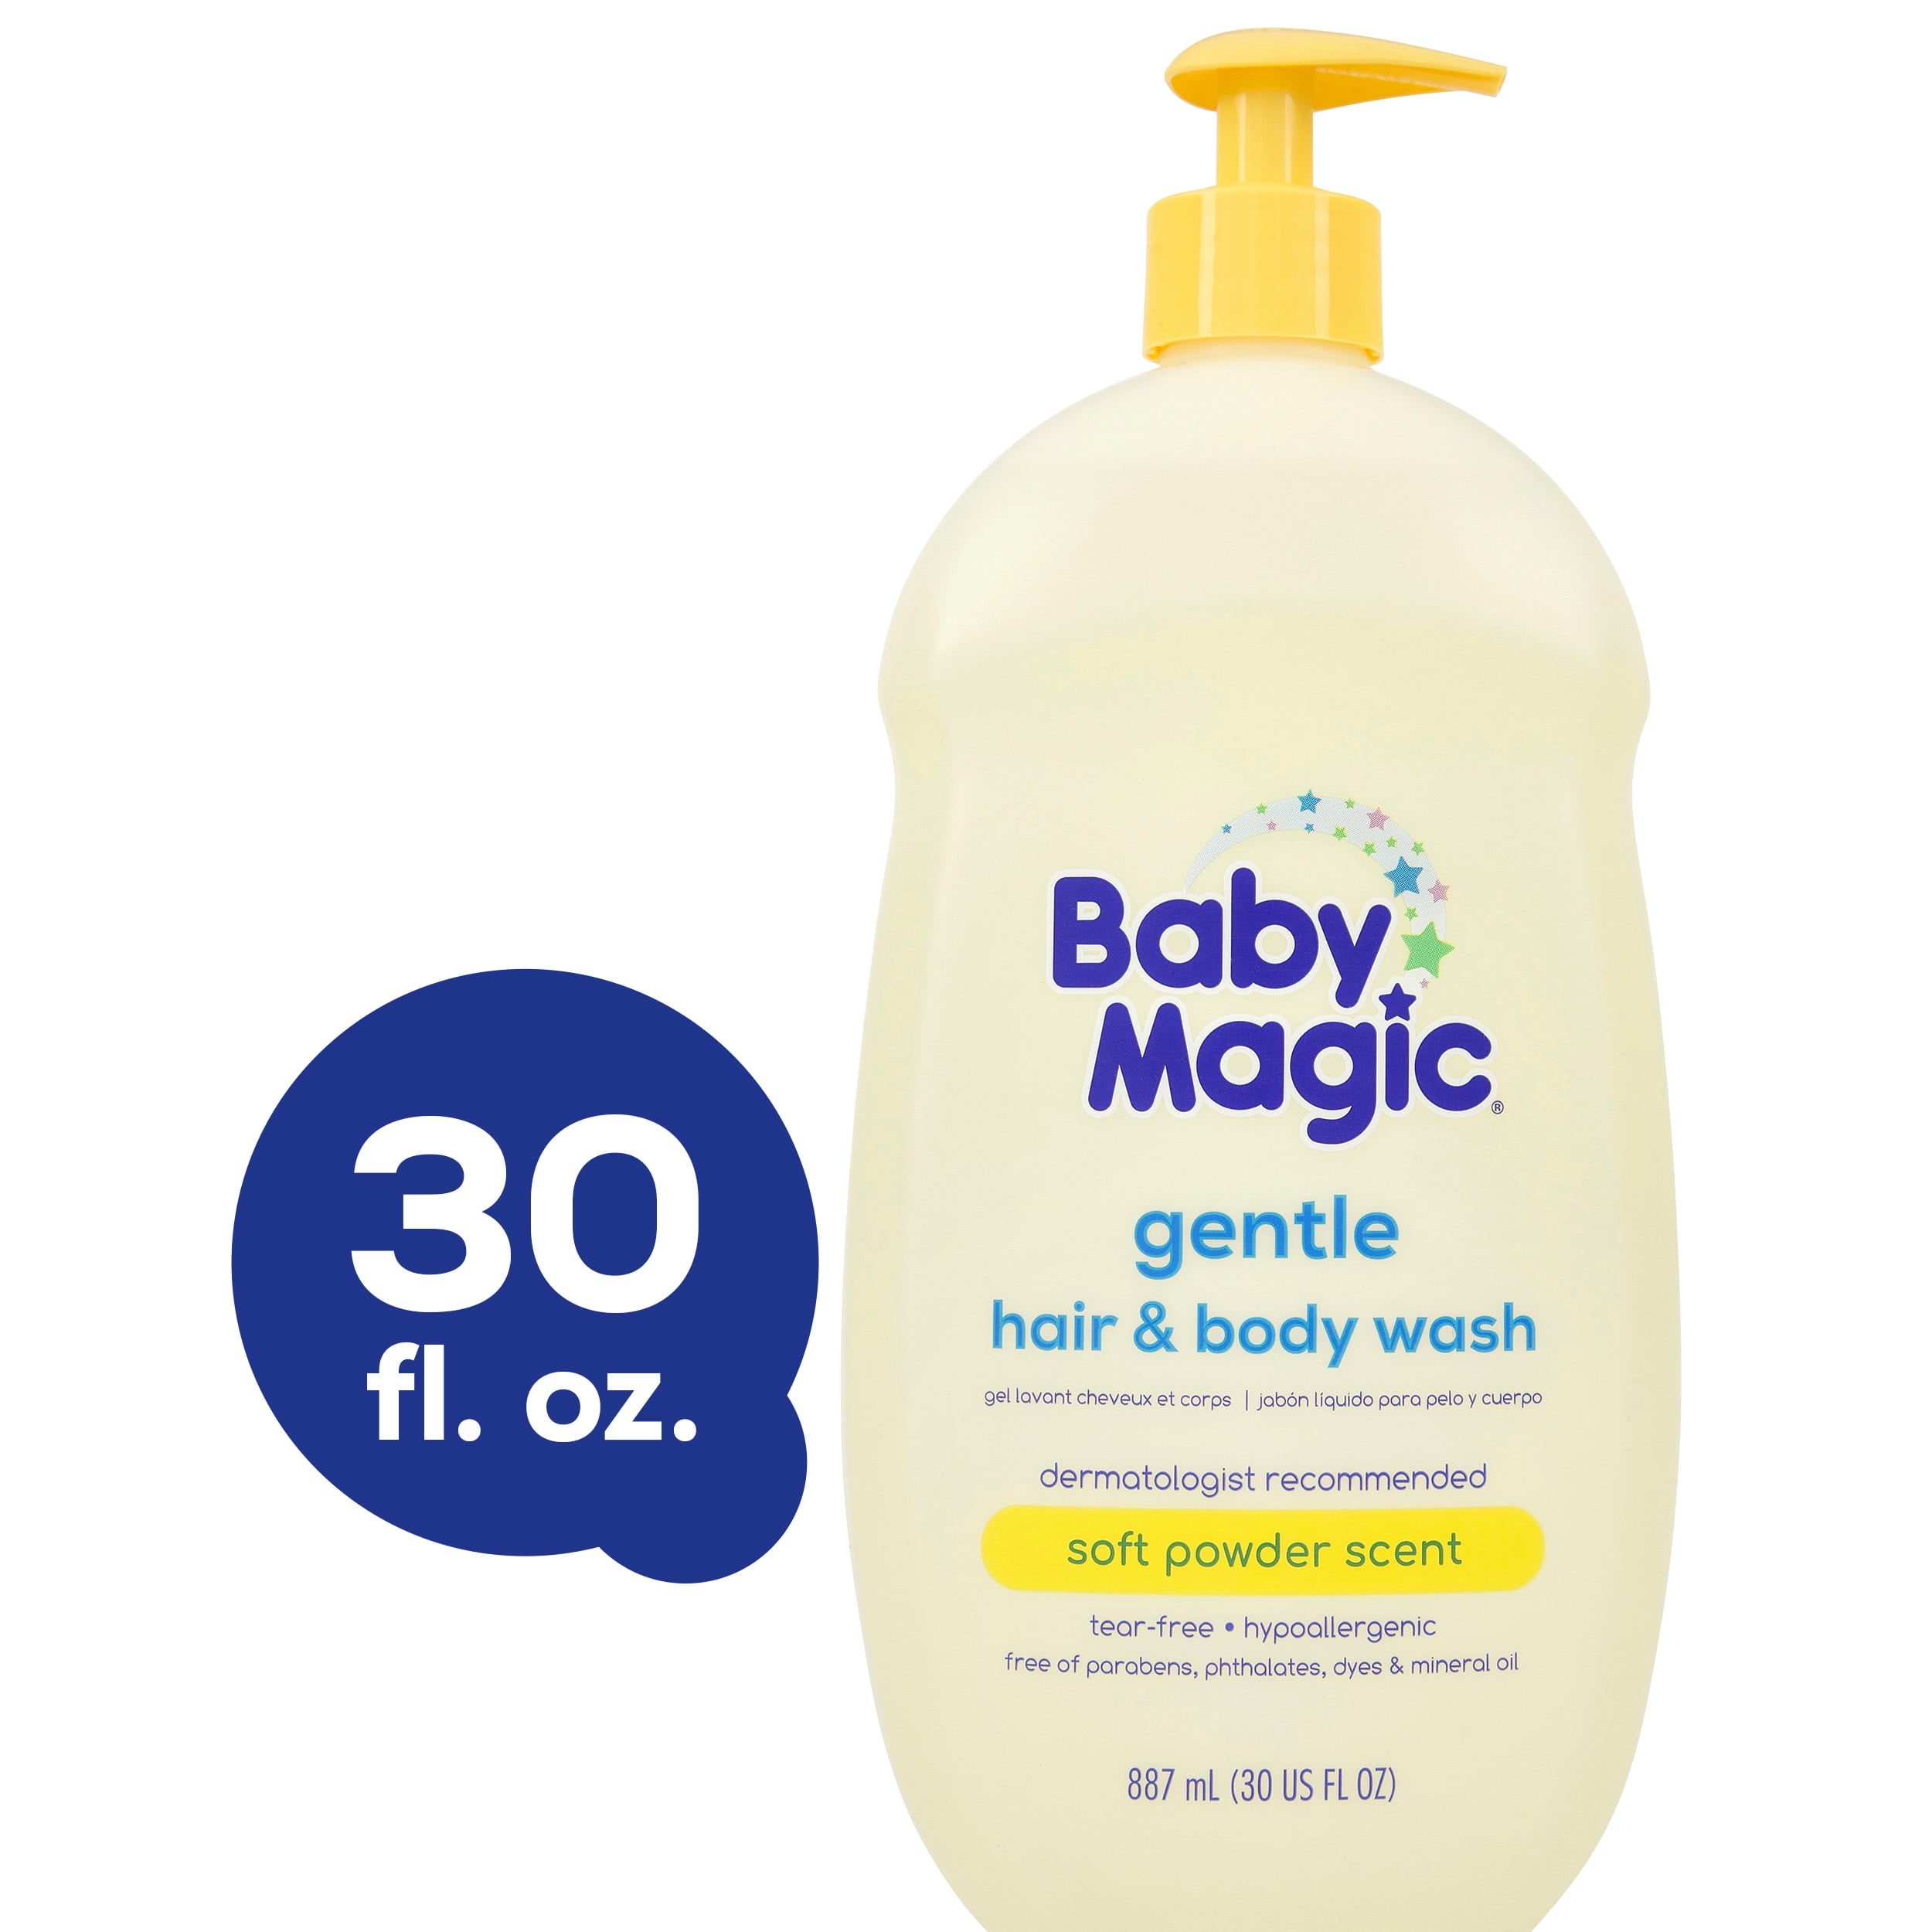 Baby Magic Tear-Free Gentle Hair and Body Wash, Soft Powder Scent,  Hypoallergenic, 30 oz. 